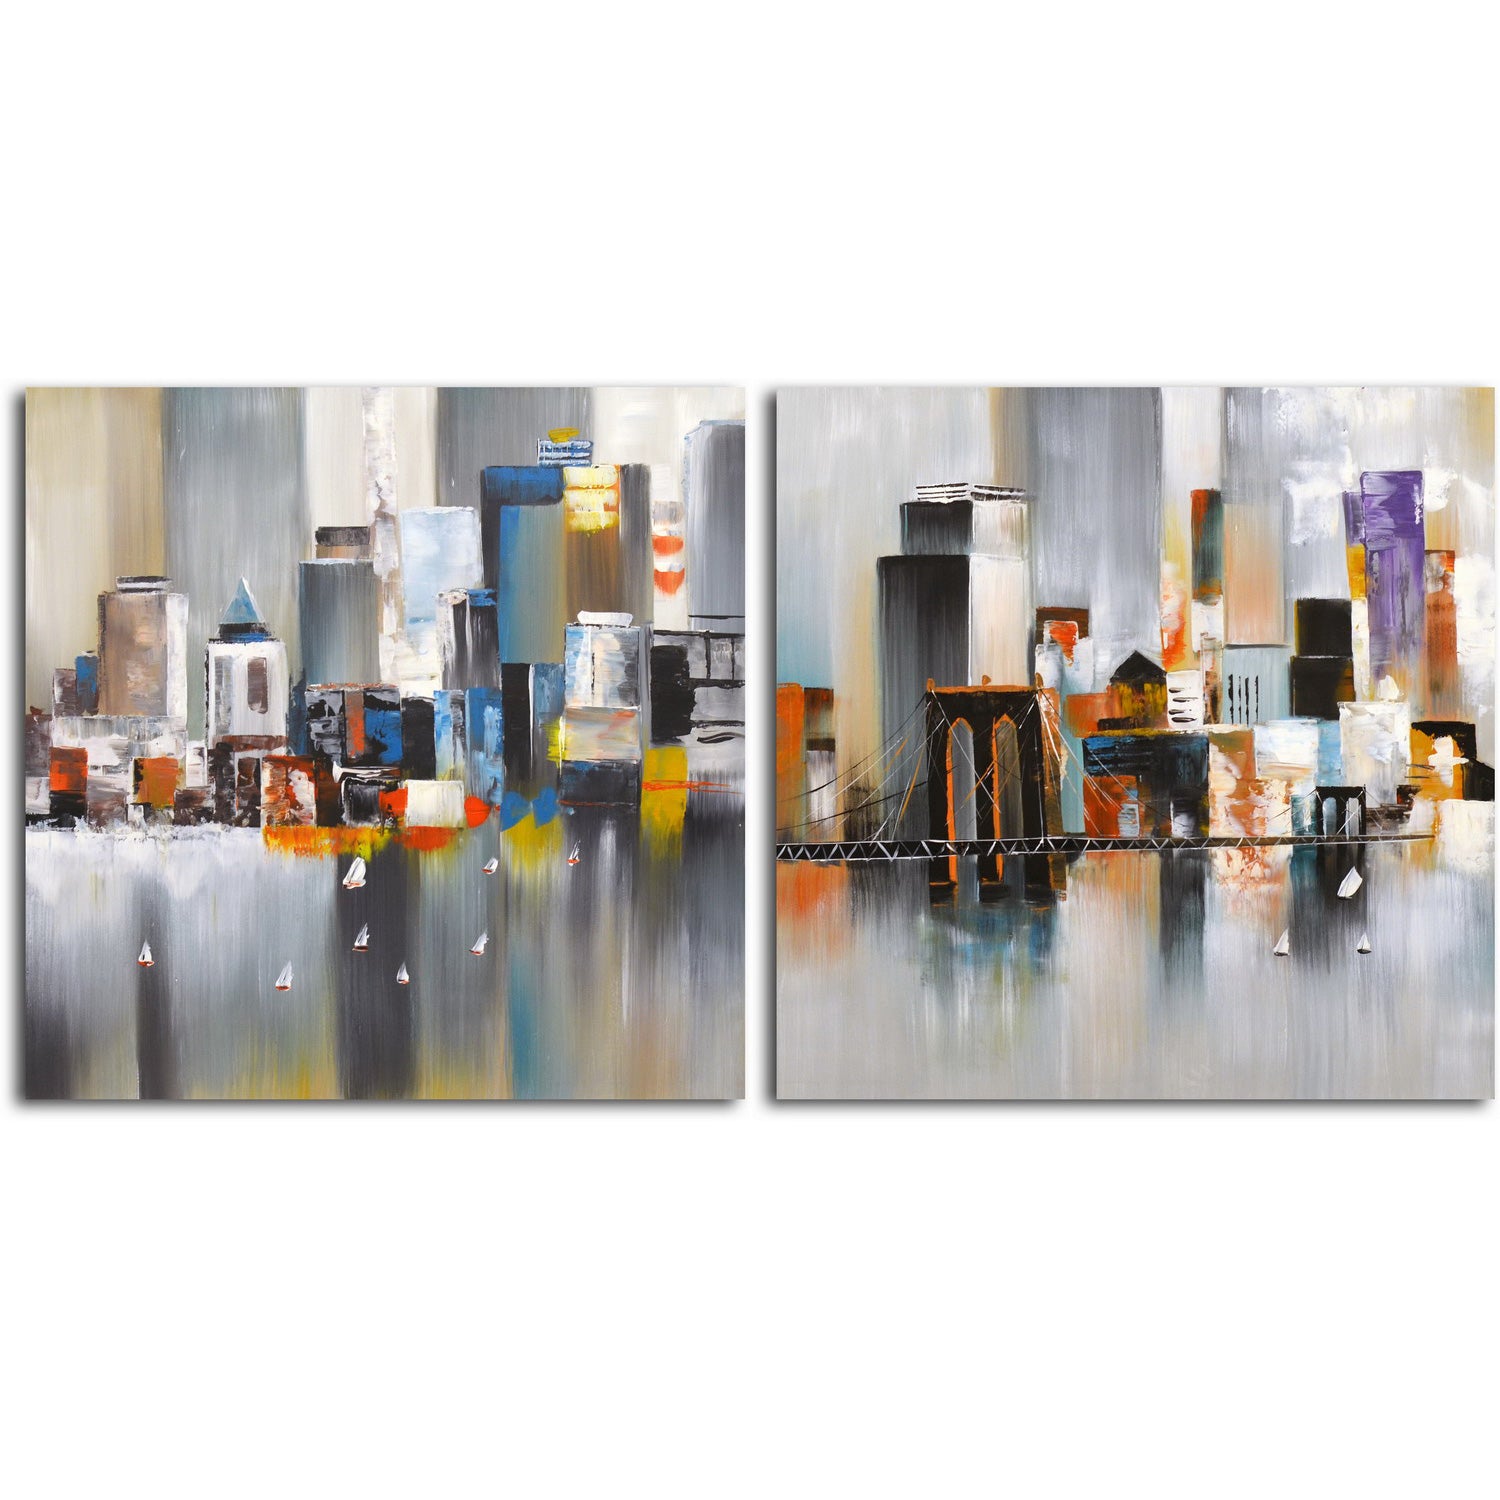 "Reflections on the Water" Original painting on canvas - Set of 2